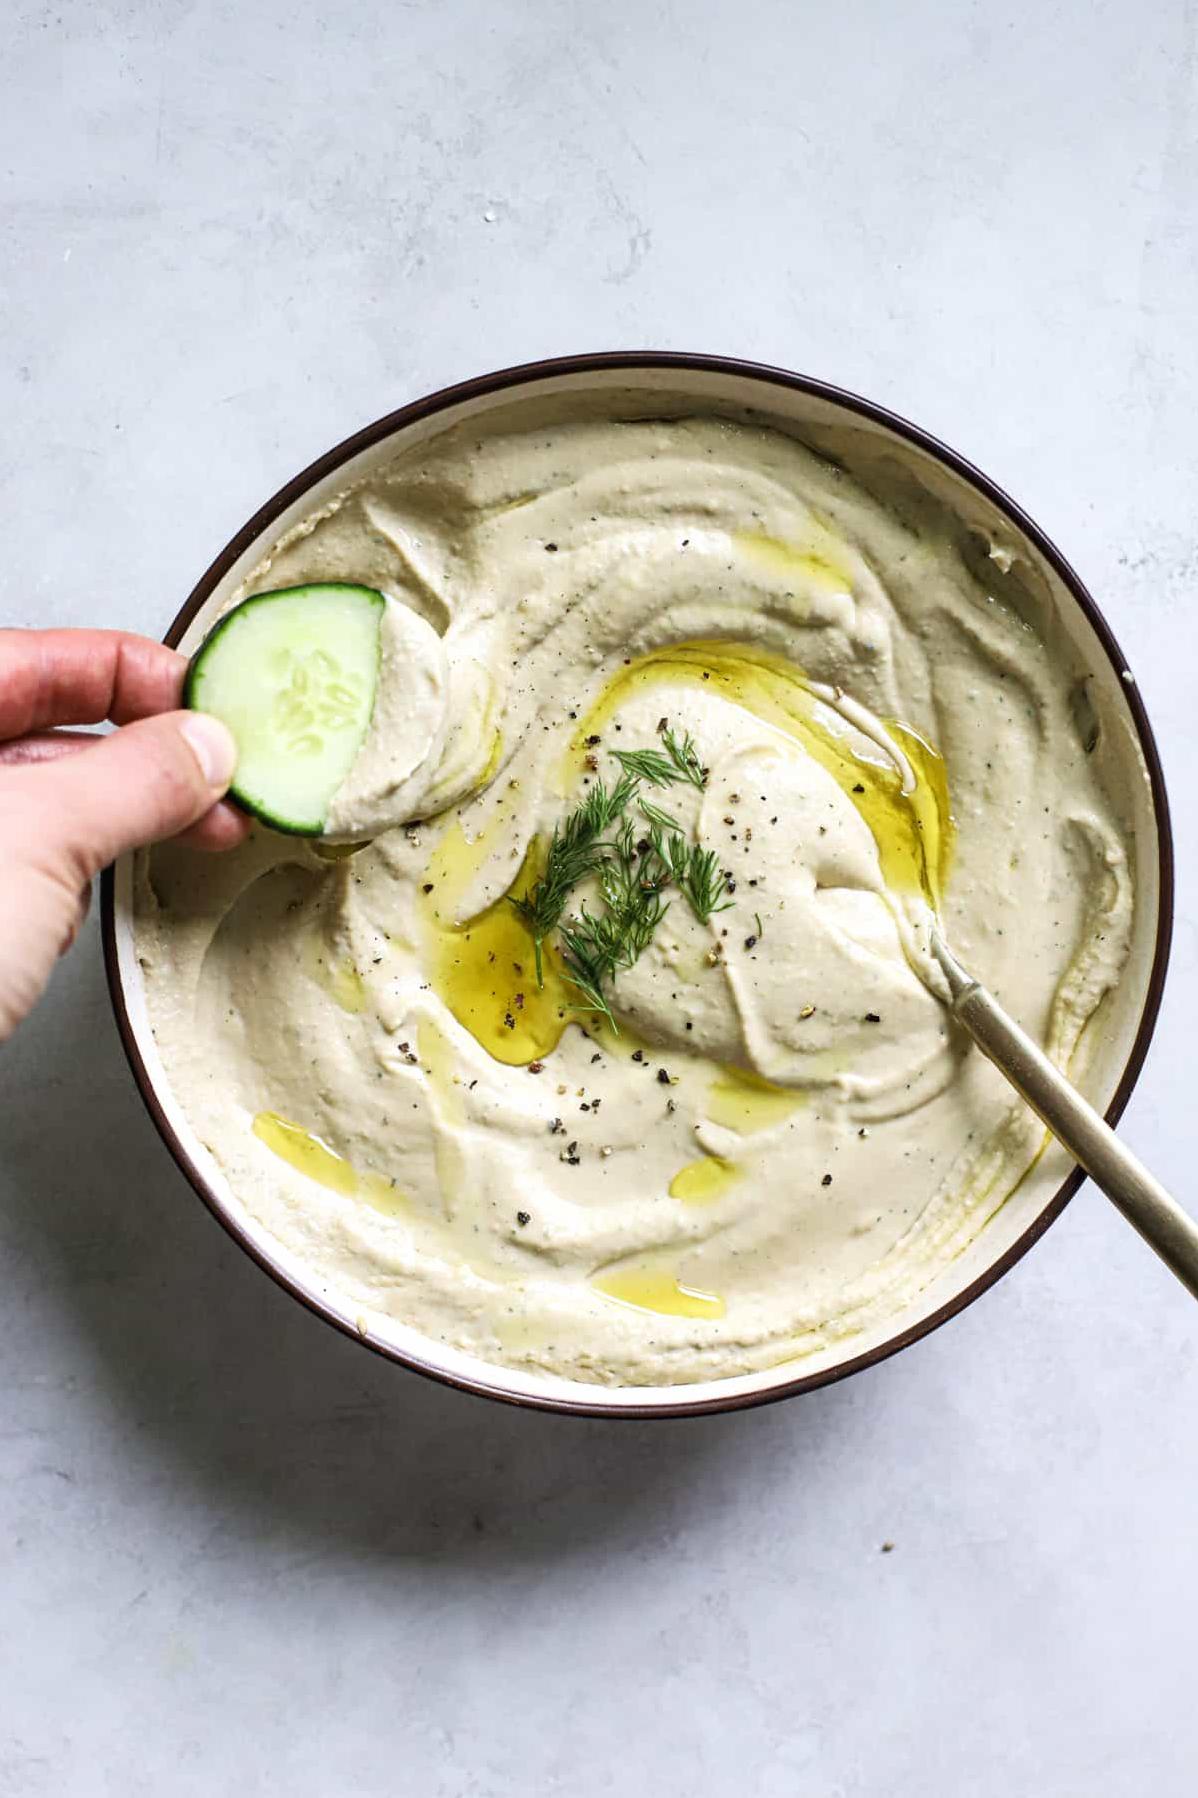  Bursting with fresh herbs and tangy lemon - this dip is a crowd pleaser!